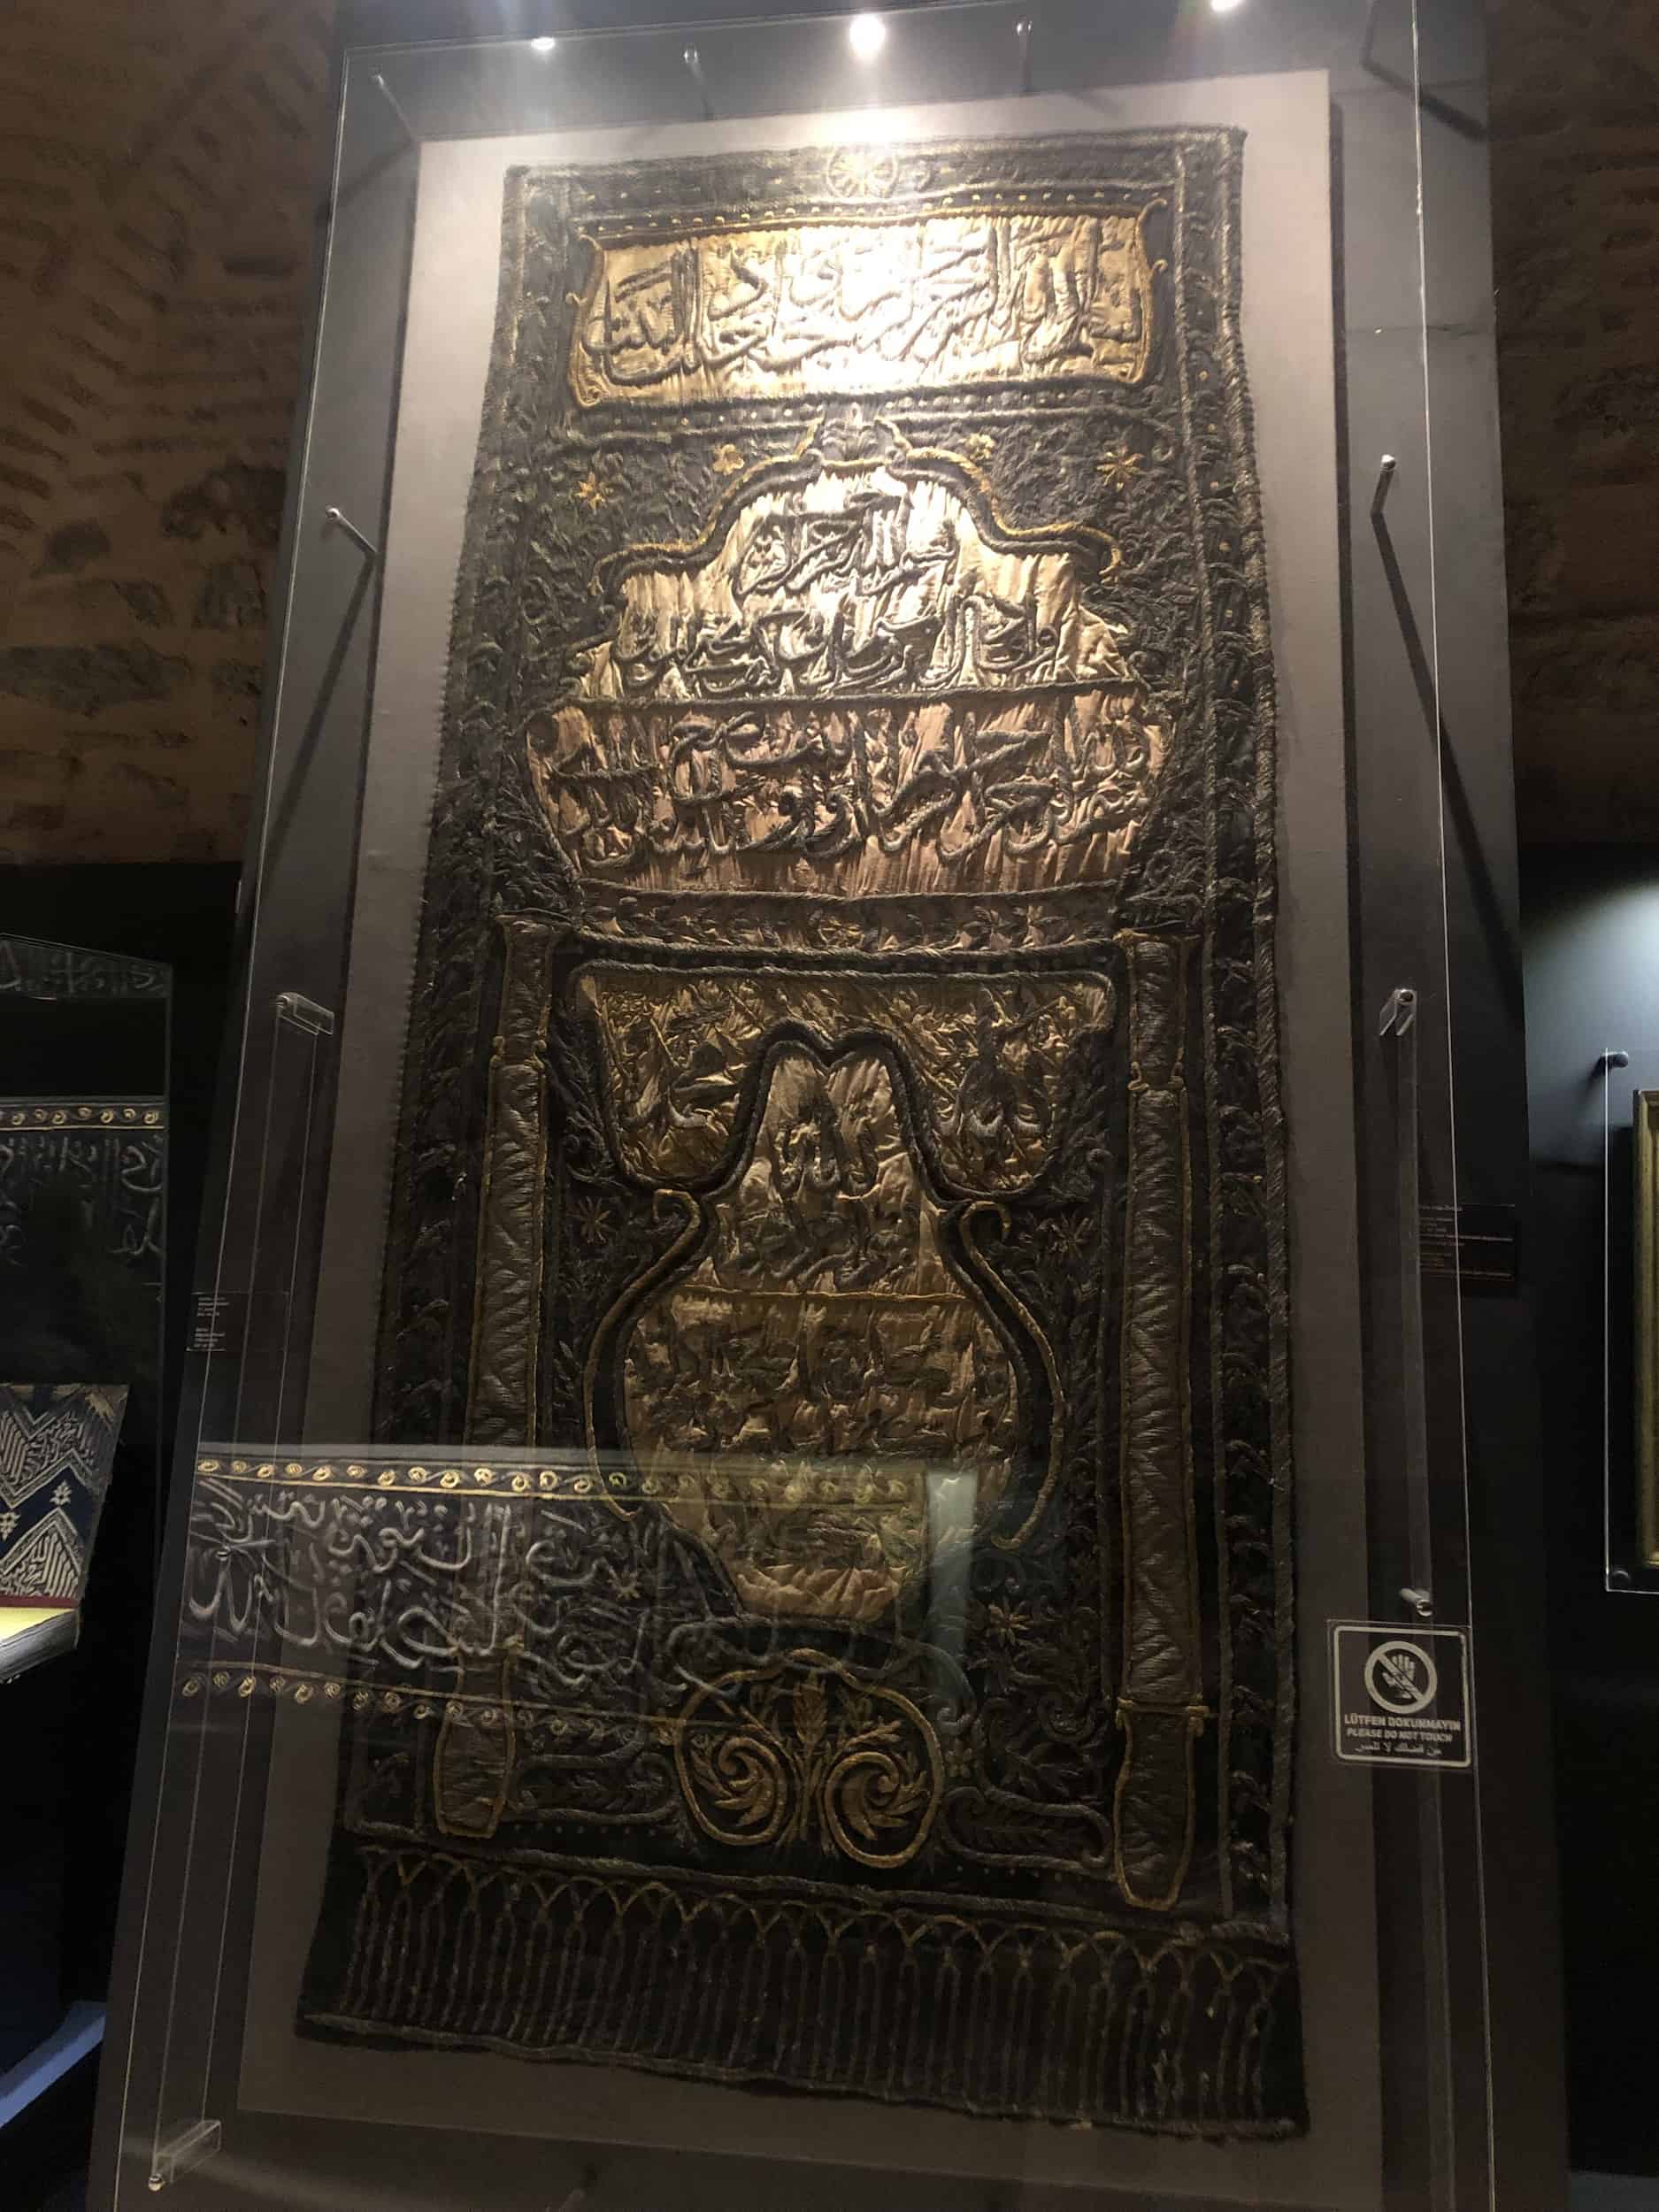 19th century curtain from the Kaaba gate